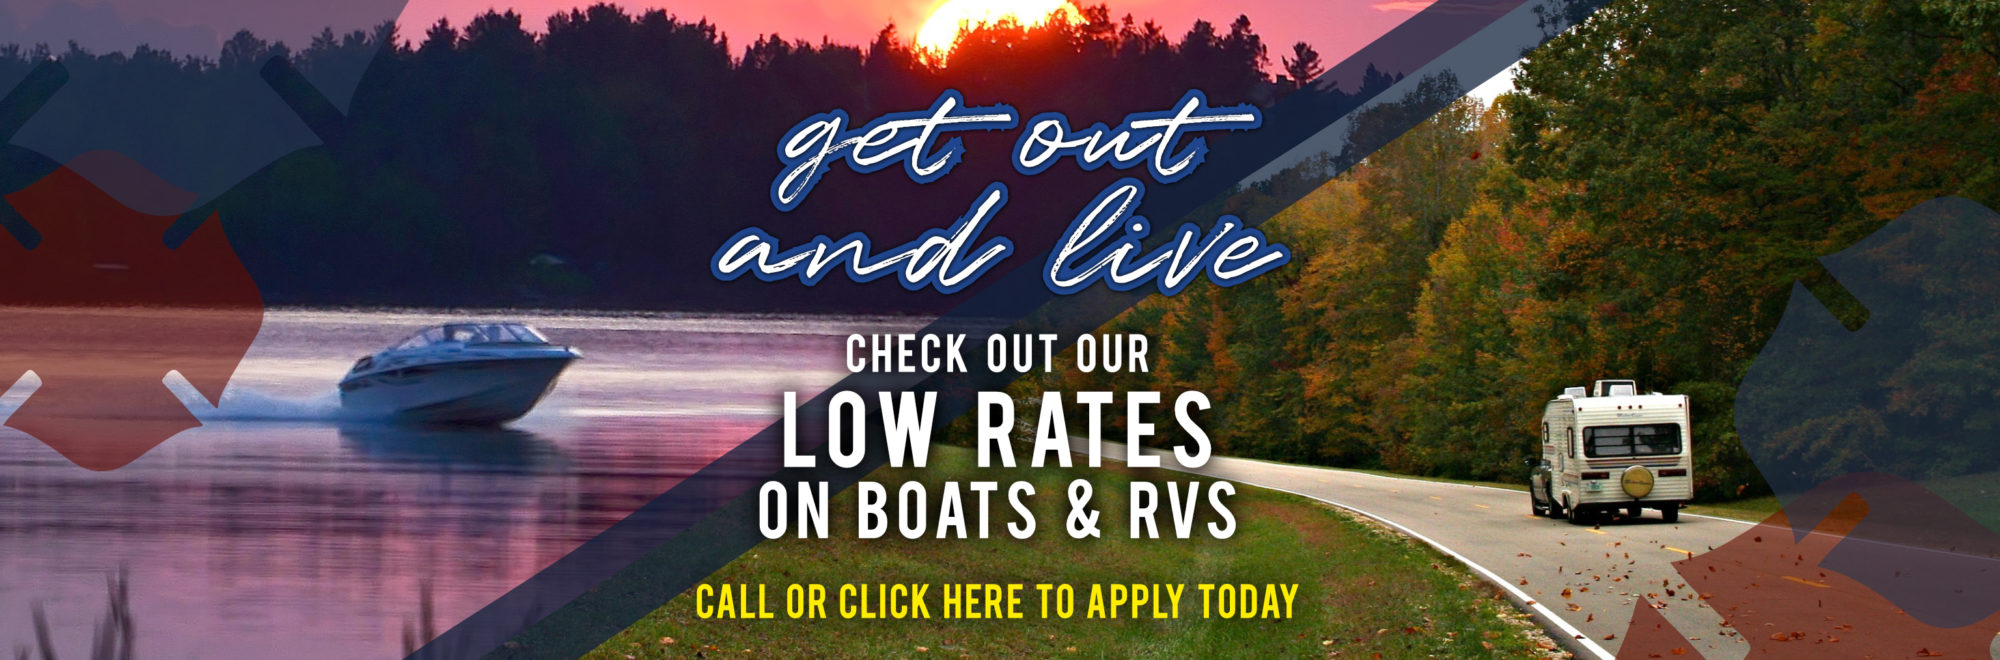 Get Out and Live! Check out our low rates on boats & RVs. Apply today!